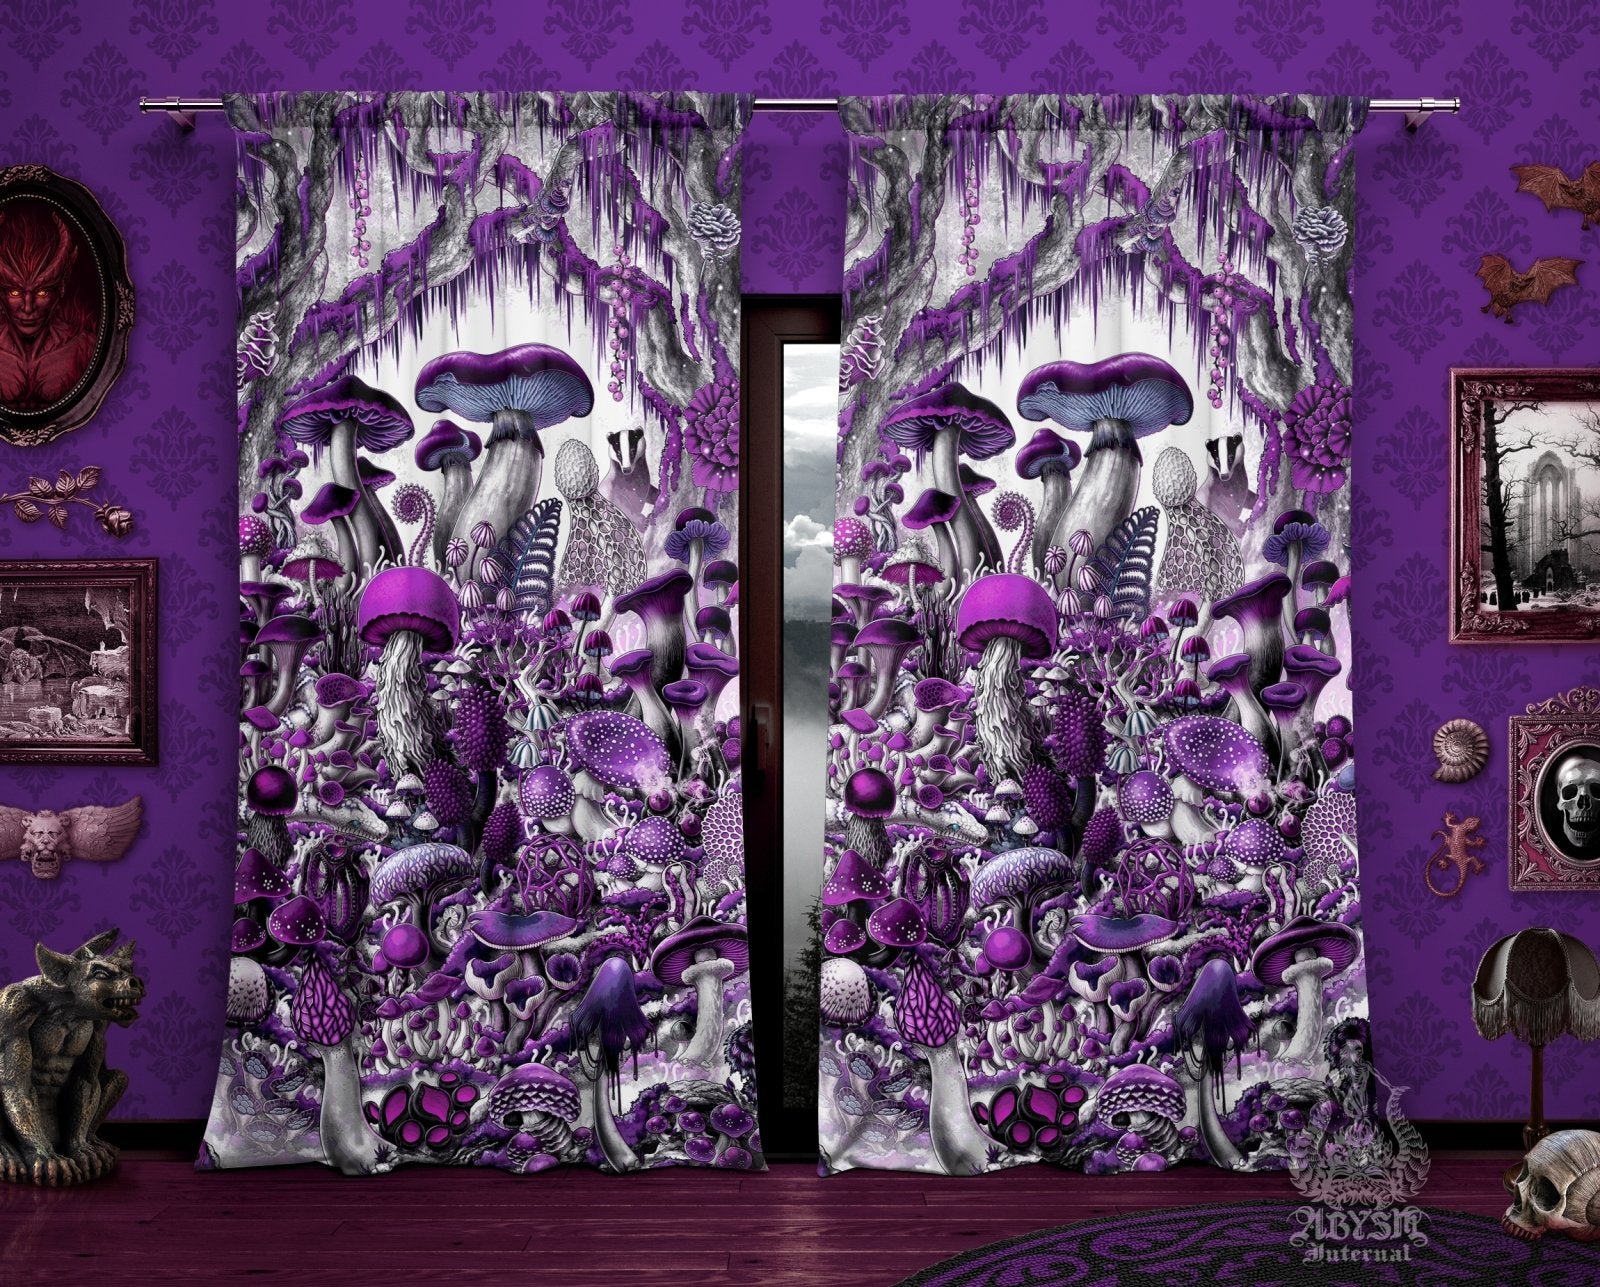 Gothic Mushrooms Blackout Curtains, Long Window Panels, Indie Art Print, Home and Room Decor - Magic Shrooms, Purple White Goth - Abysm Internal